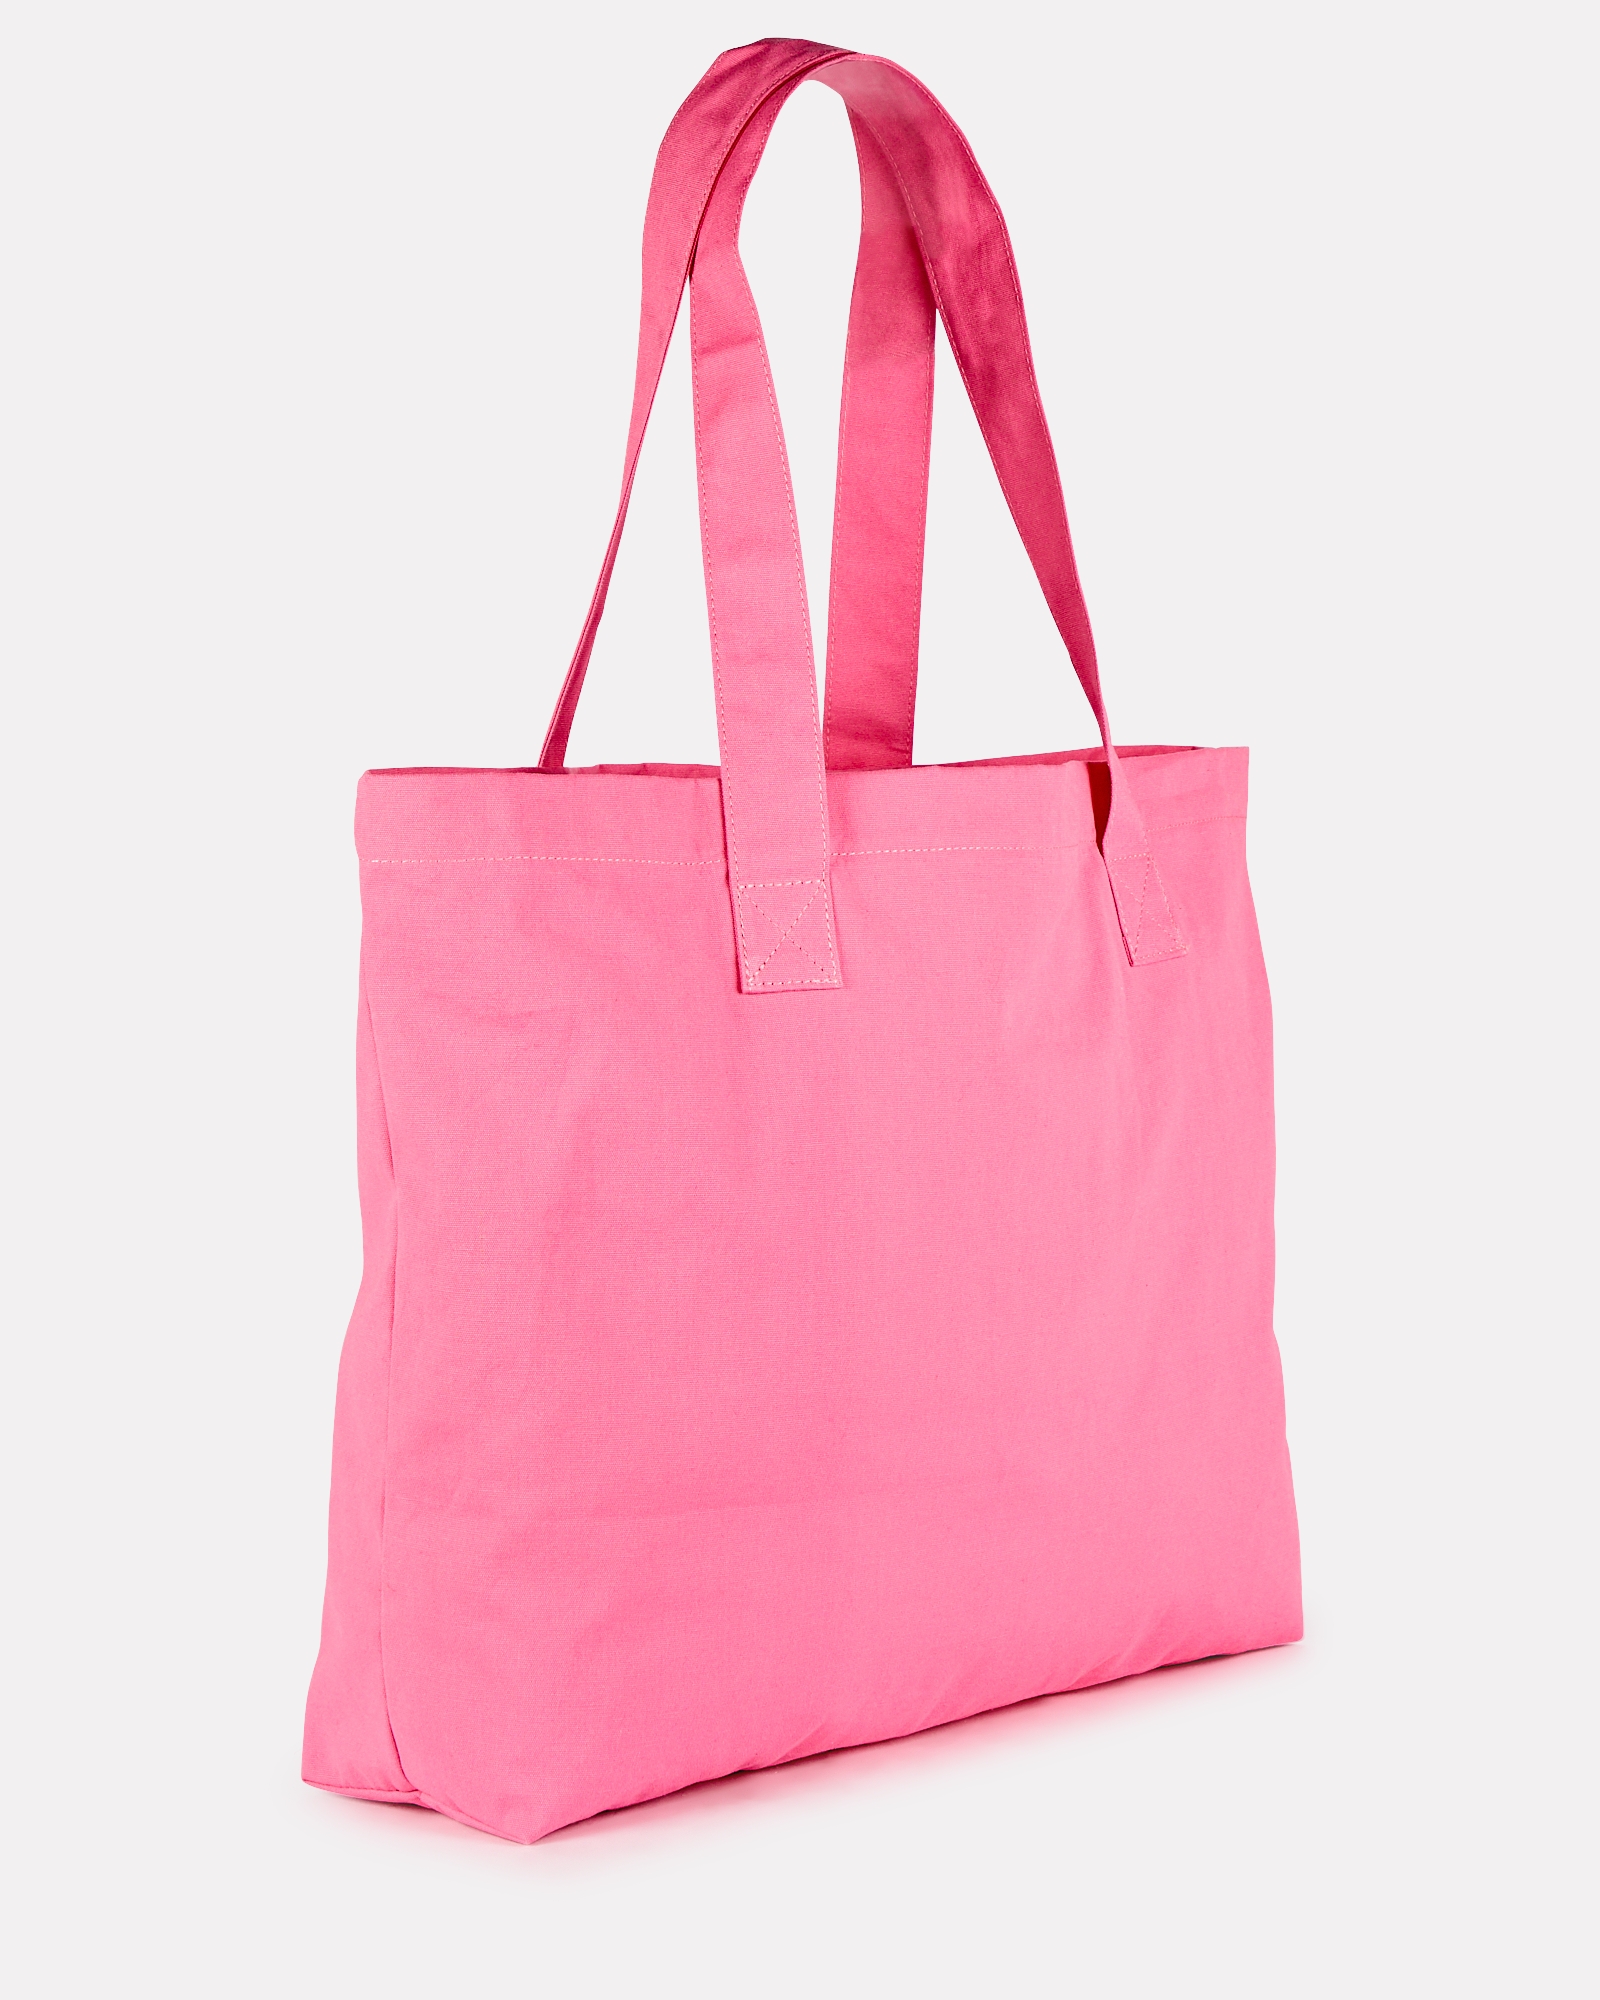 Year of Ours Raise Your Vibration Cotton Tote Bag | INTERMIX®